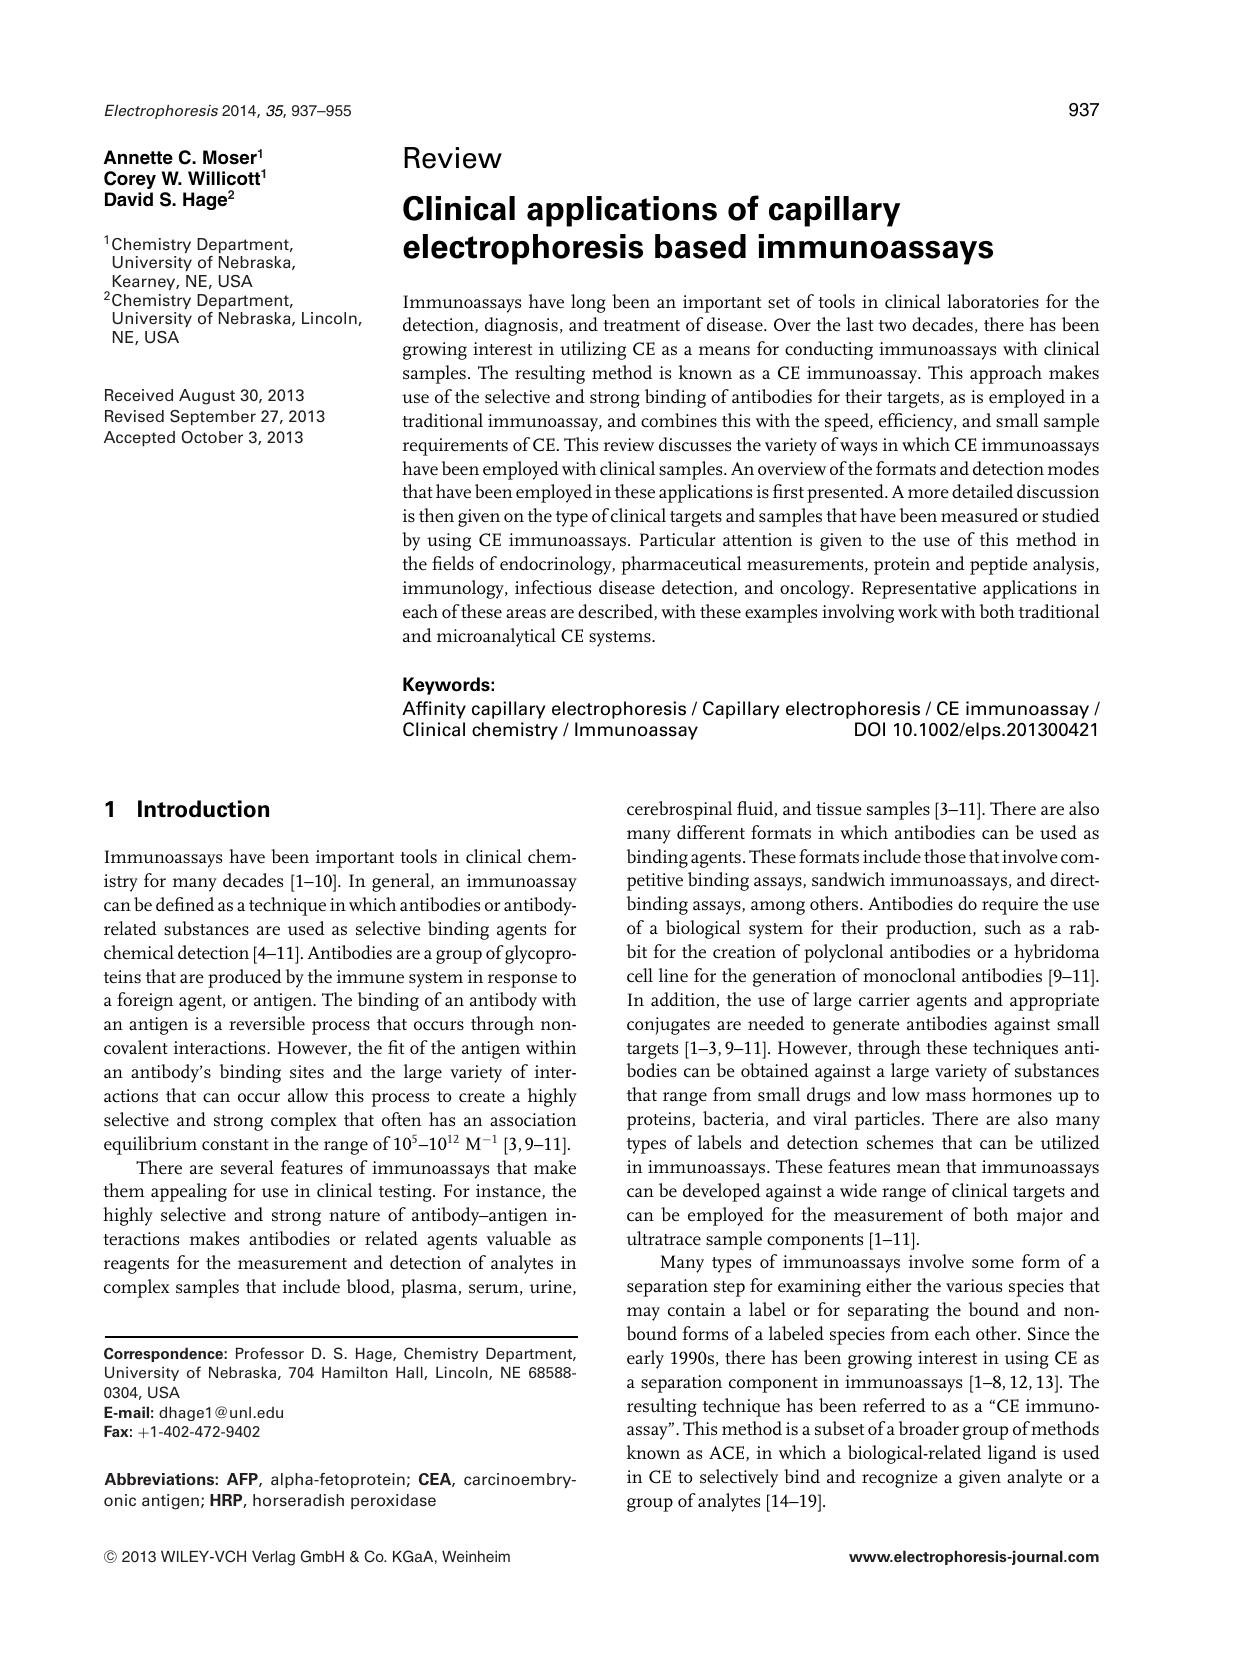 Clinical applications of capillary electrophoresis based immunoassays by Unknown